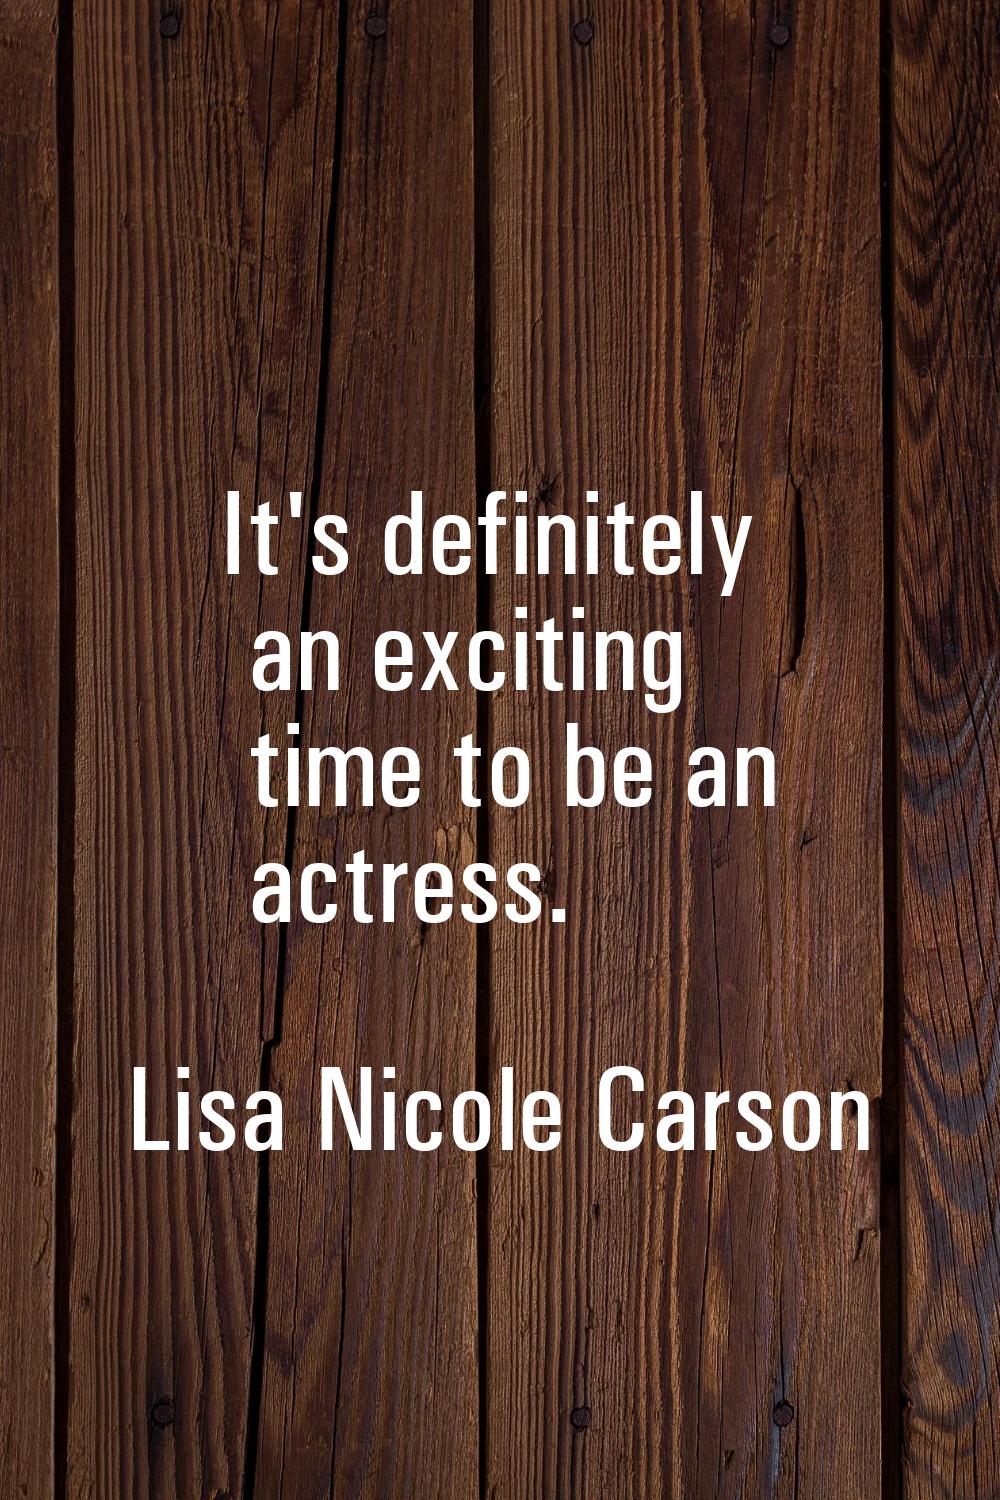 It's definitely an exciting time to be an actress.